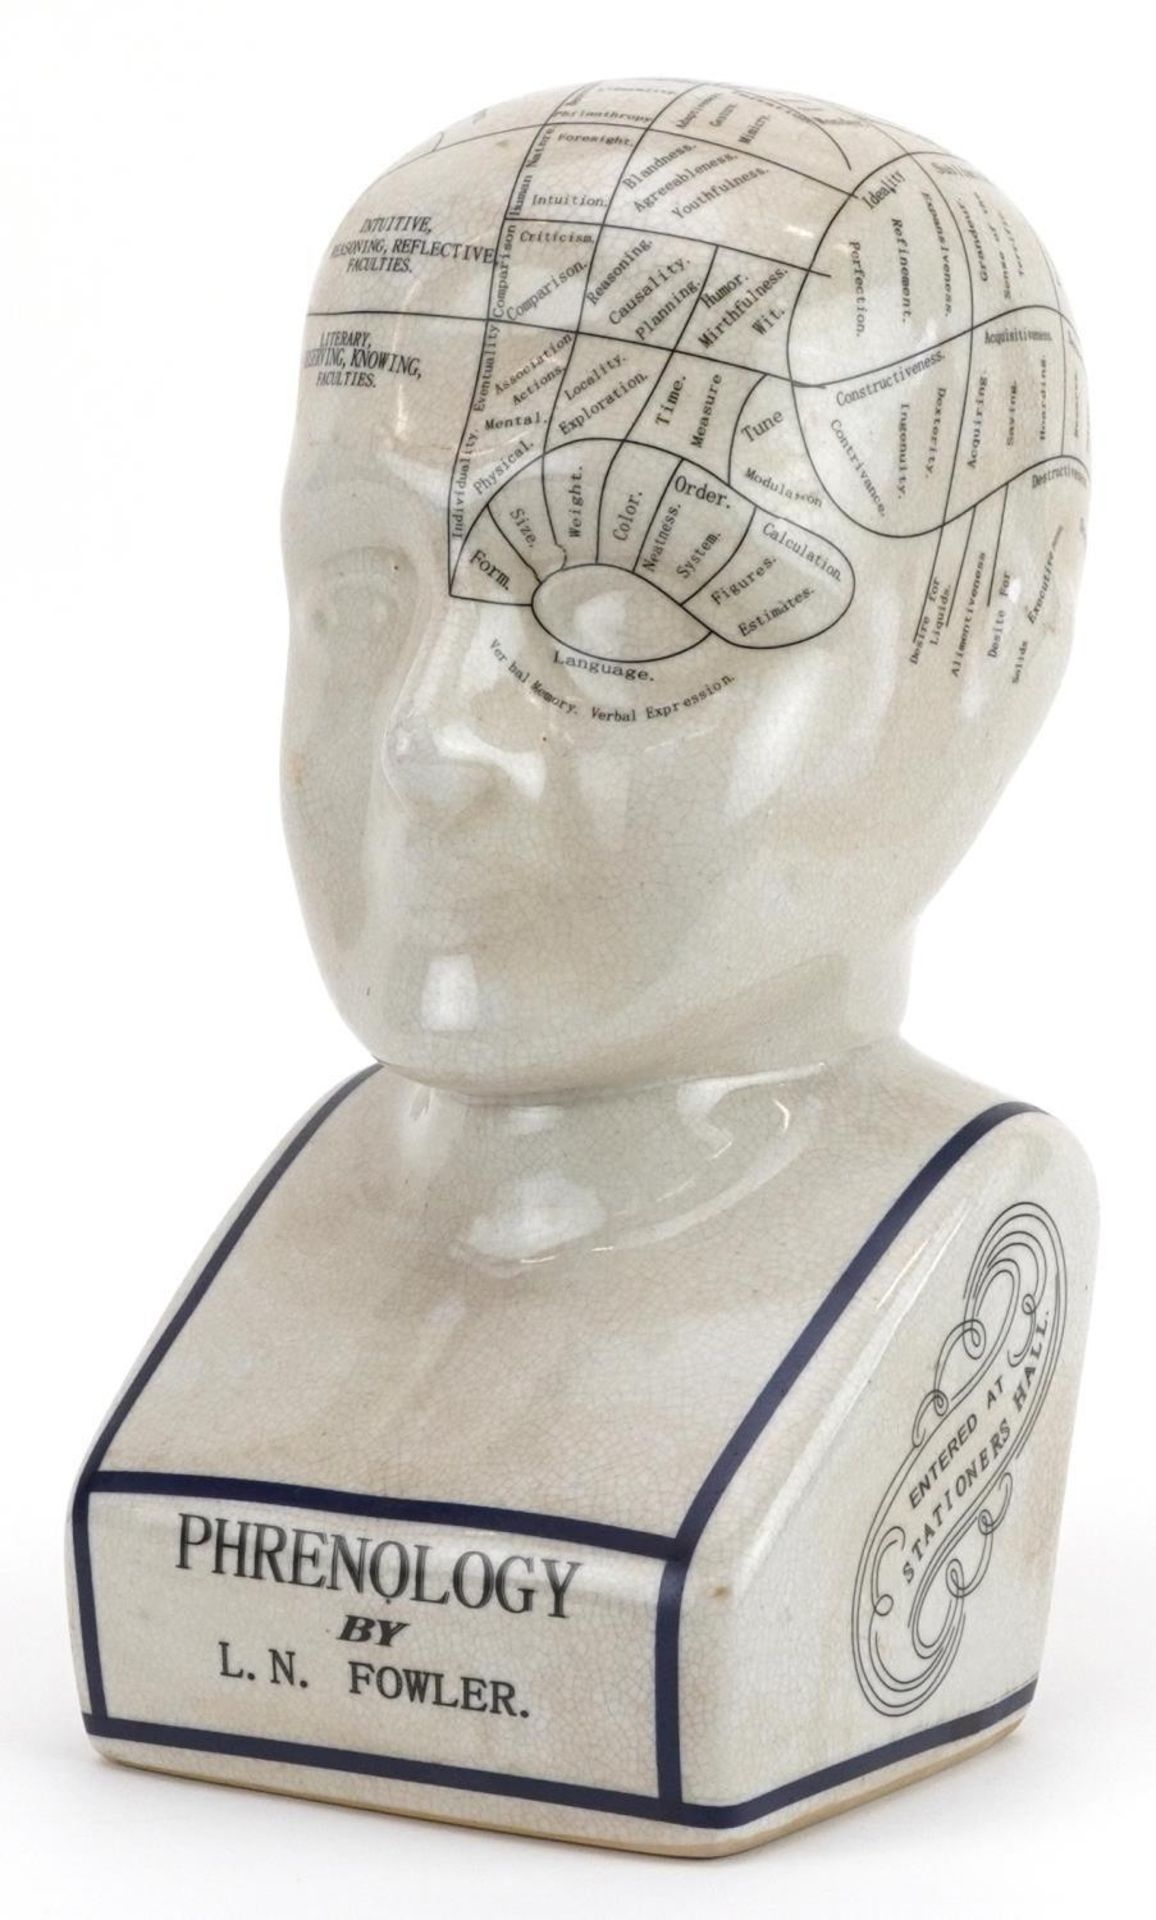 Decorative porcelain phrenology head after L N Fowler, 28.5cm high : For further information on this